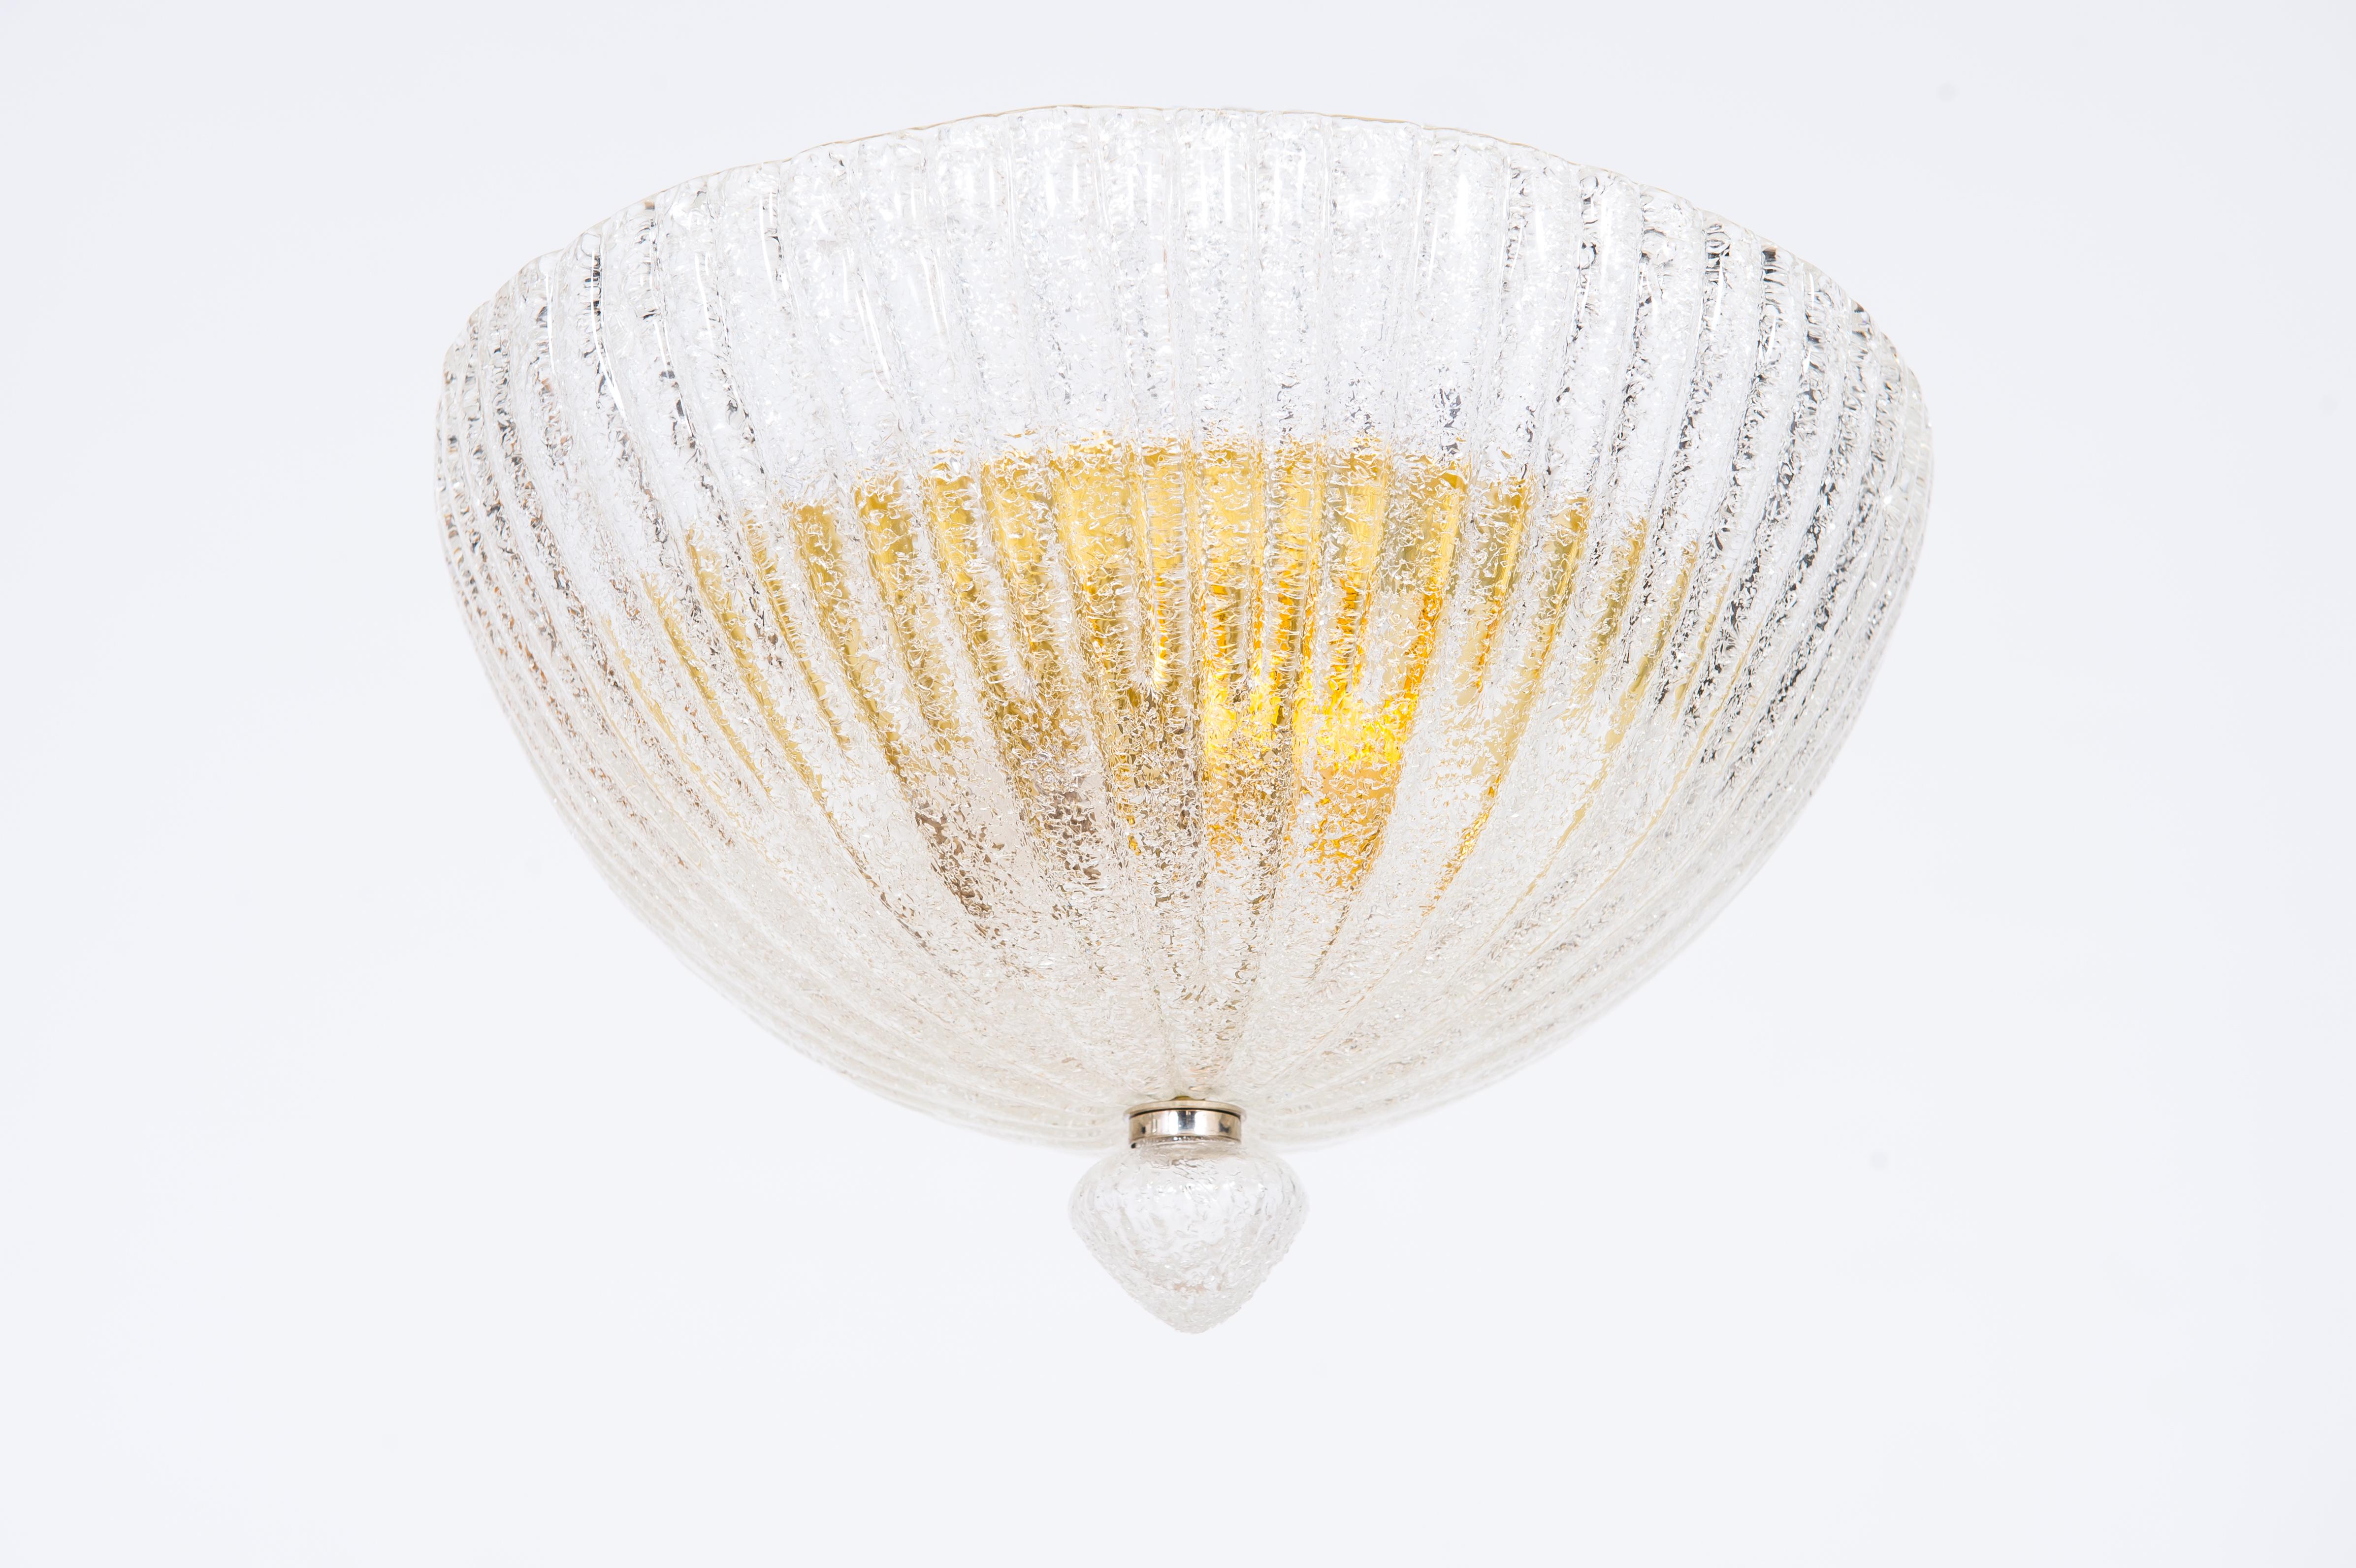 Italian Venetian Circular Flush Mount in Murano Glass Contemporary 2000s
This beautiful work of art stands out for the beauty and refinement of its design and its details. It was made in the 2000s in the Venetian island of Murano by local